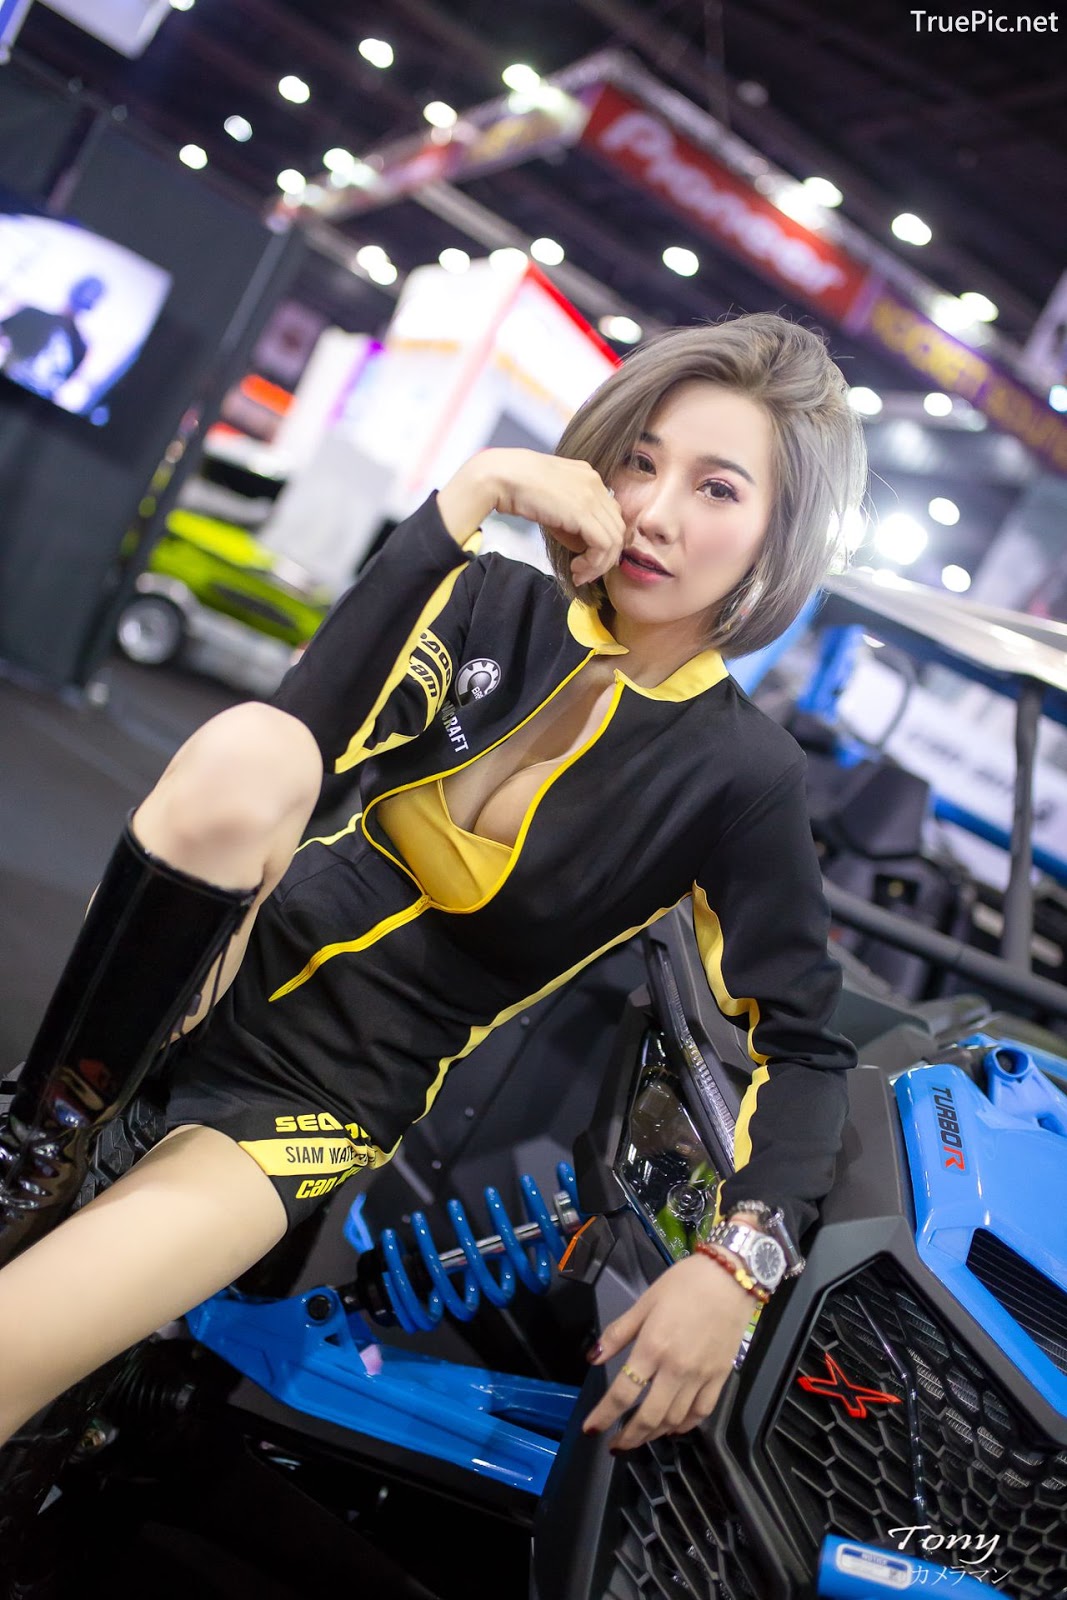 Image-Thailand-Hot-Model-Thai-Racing-Girl-At-Motor-Show-2019-TruePic.net- Picture-18